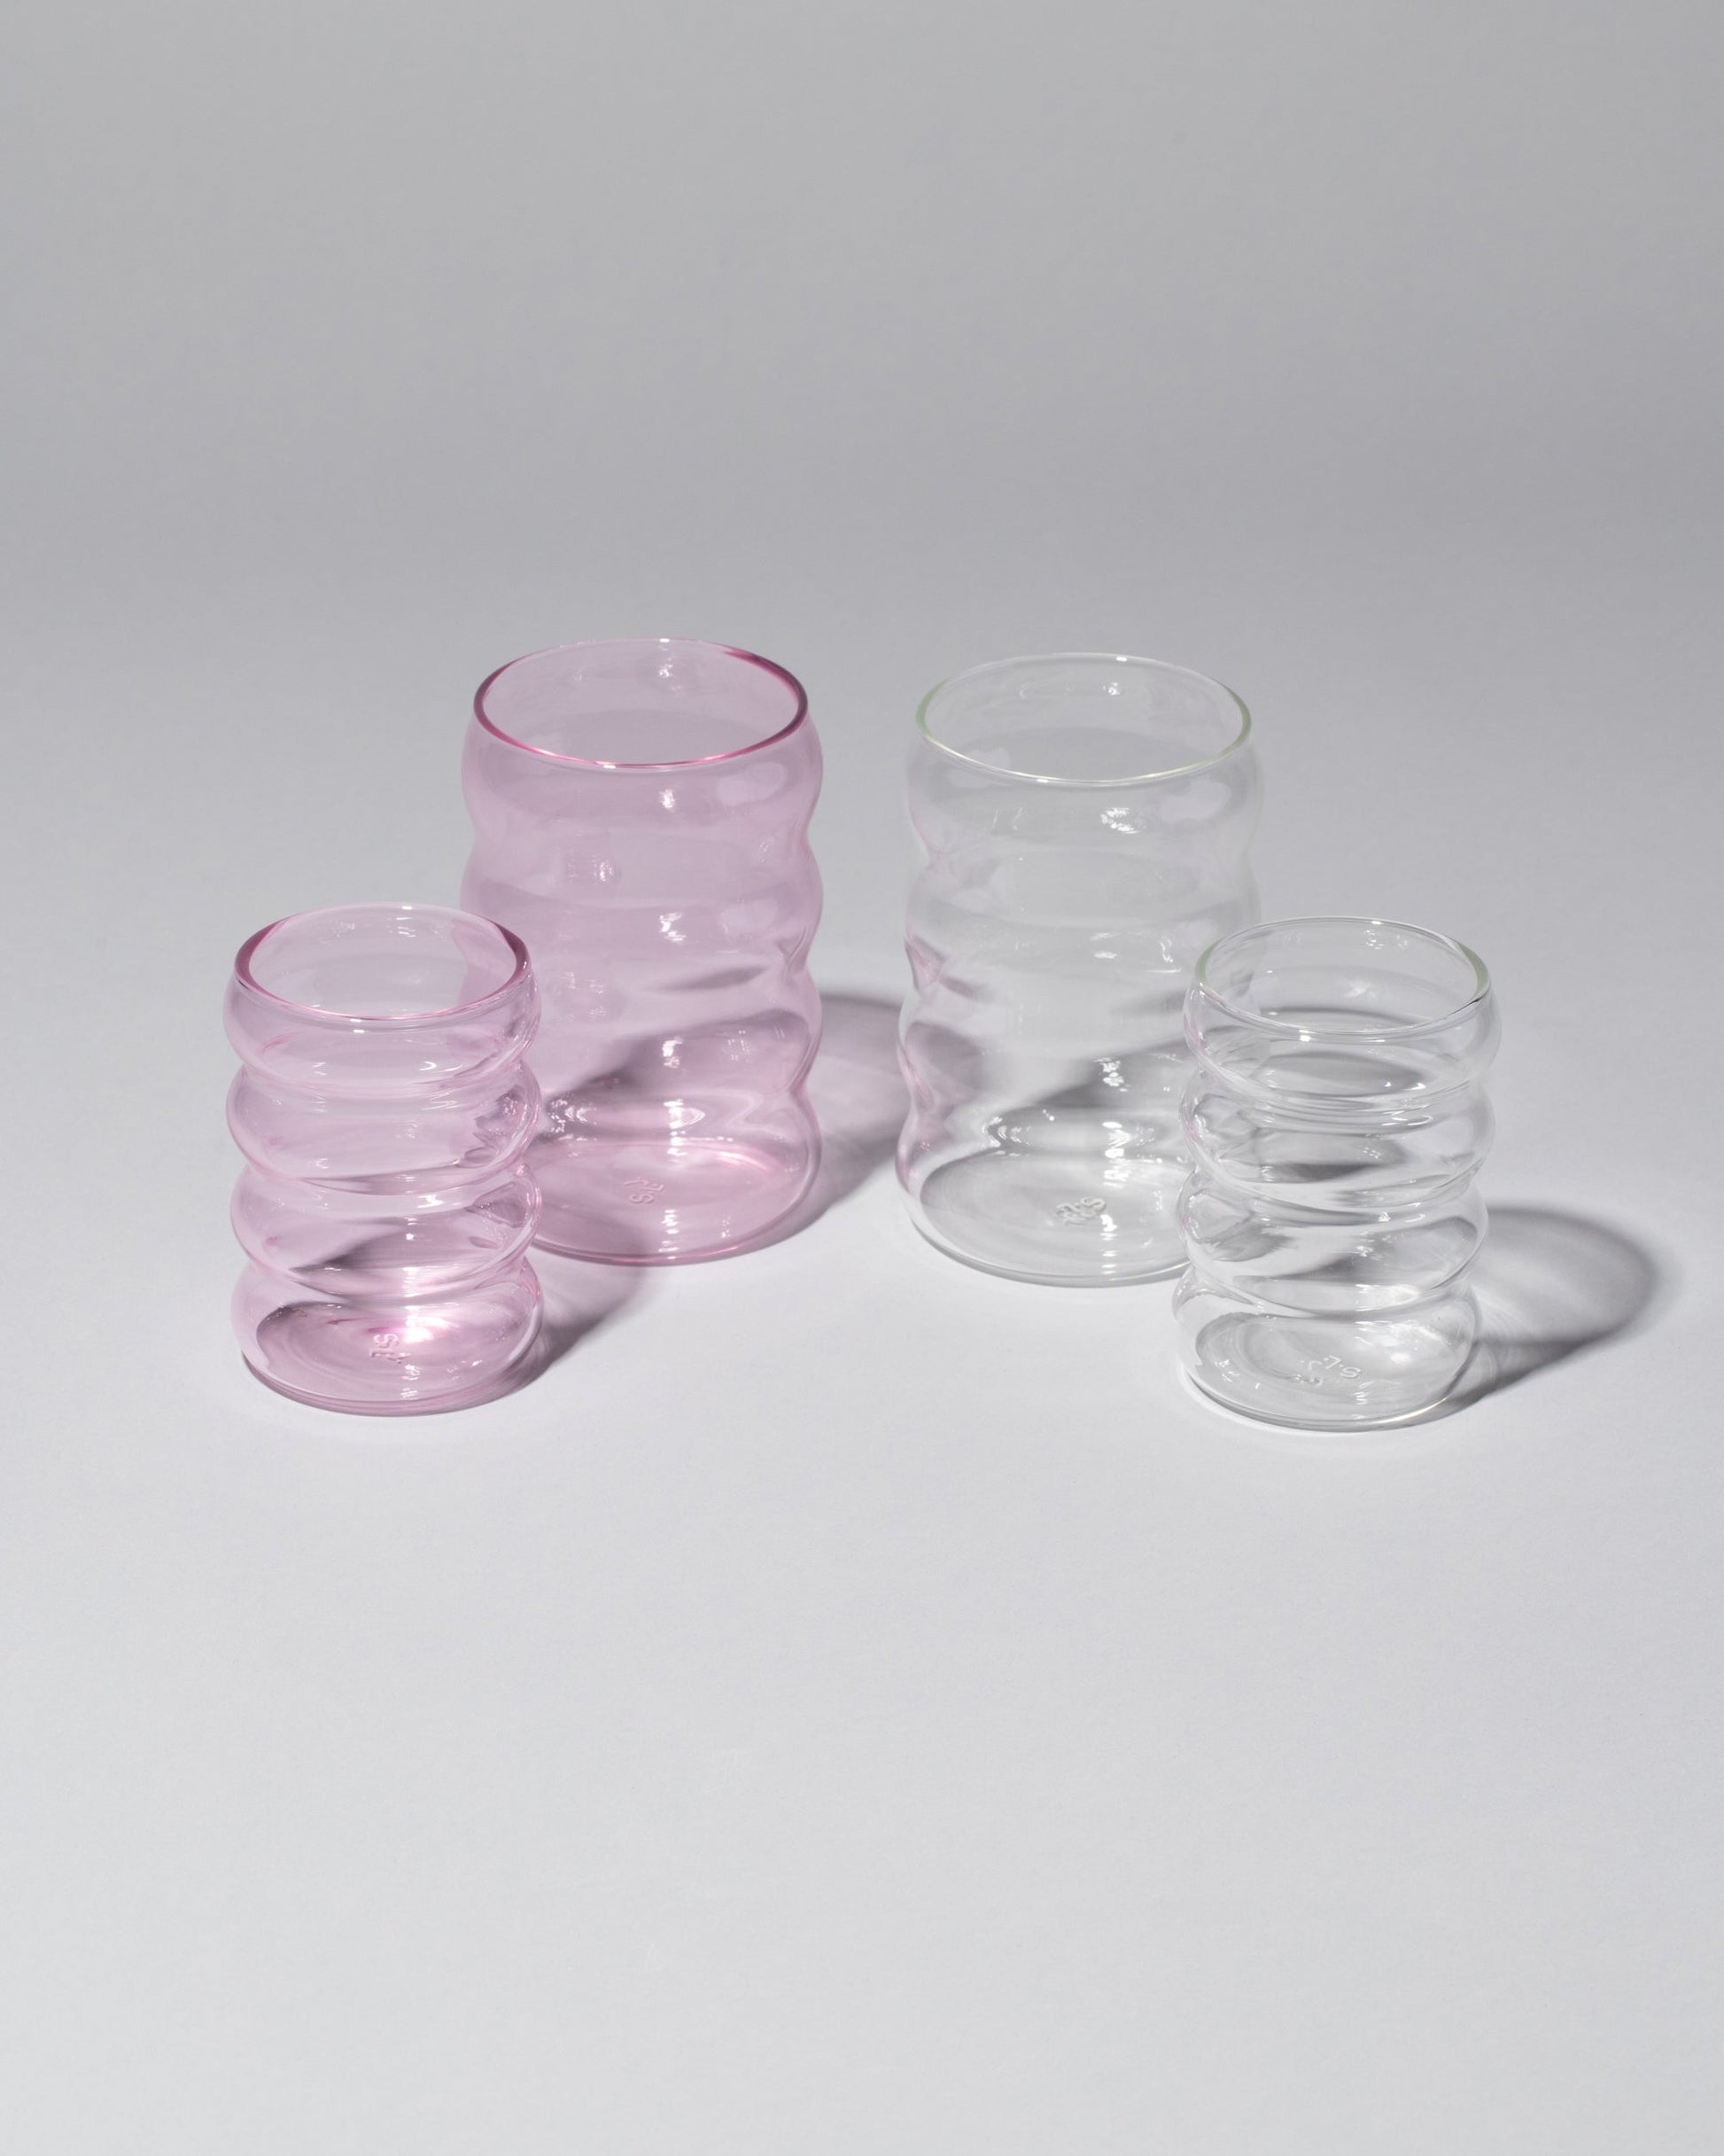 Group of Sophie Lou Jacobsen Small Pink, Large Clear, Small Clear and Large Pink Single Ripple Cups on light color background.